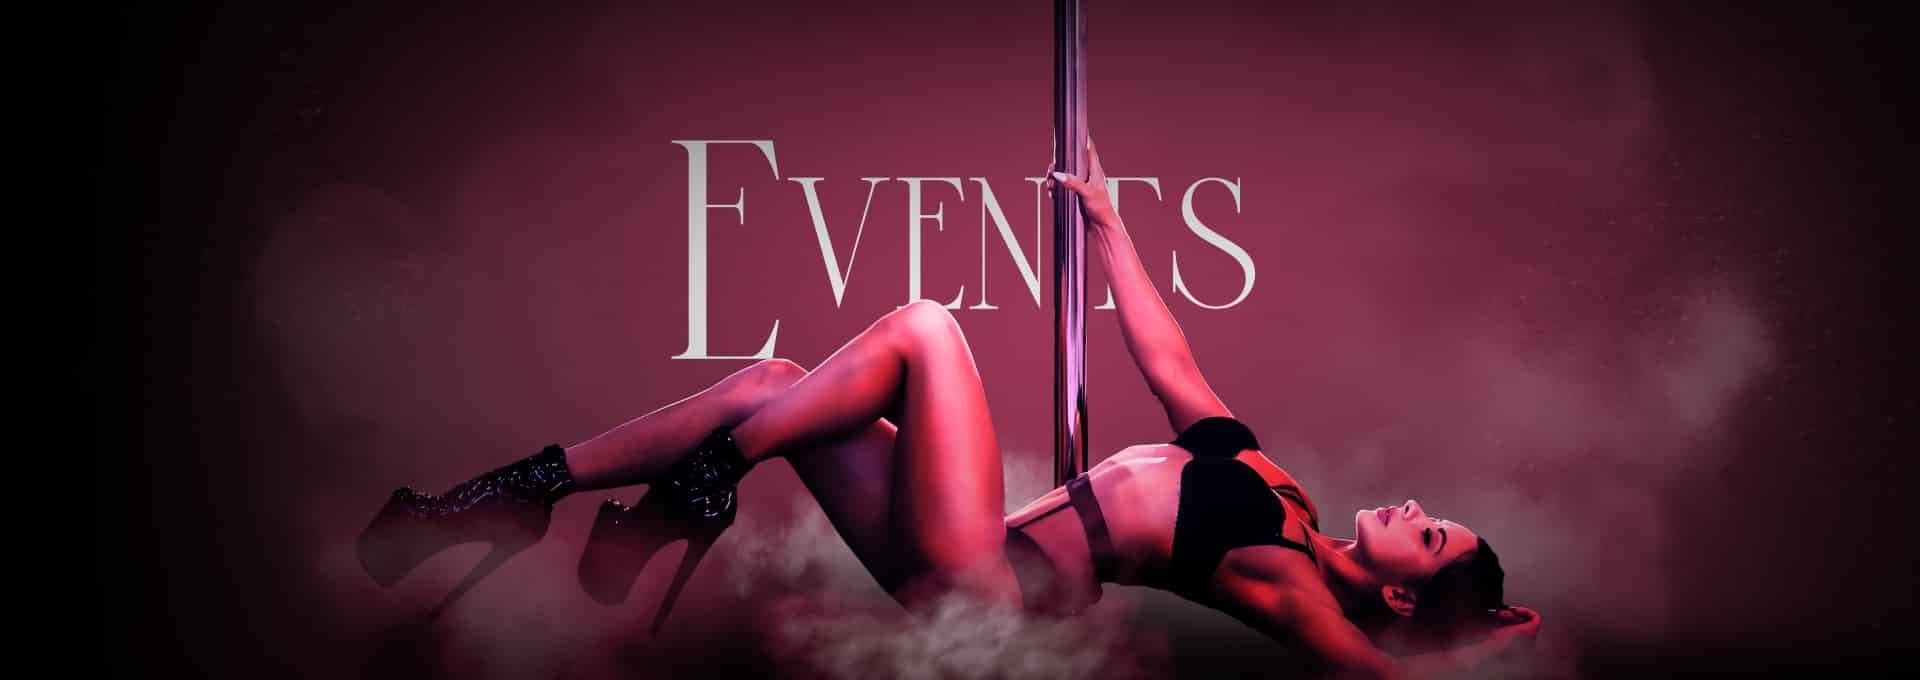 Events header